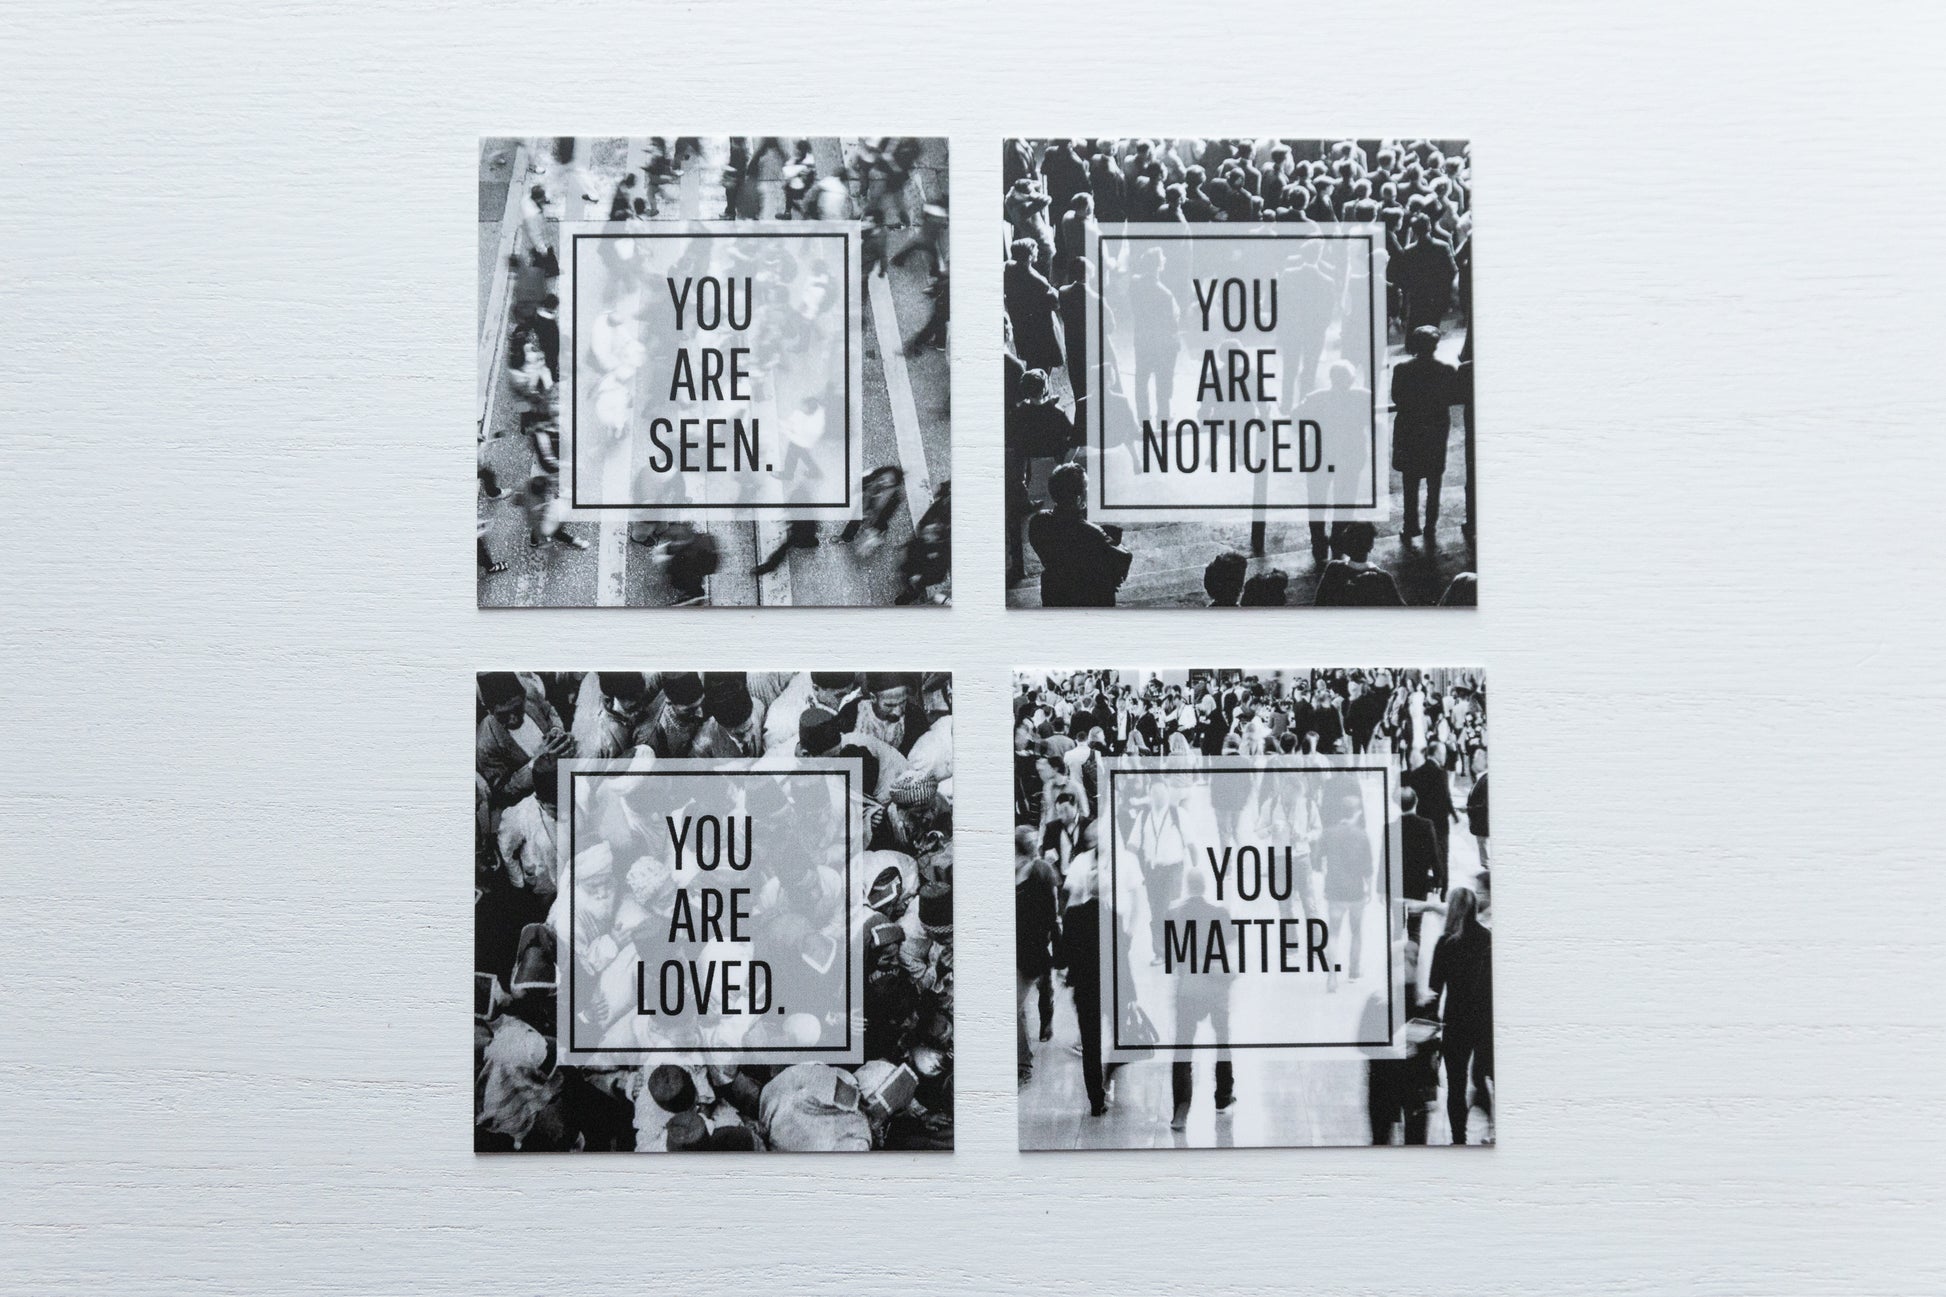 a set of four small square cards in black and white with a different view of a crowd of people on each card. Each set comes with one card with each of these sayings "you are seen", "you are noticed", "you are loved", "you matter". The back is left largely blank with only our website and hashtag in small font at the bottom, leaving plenty of room for a short note to be penned.